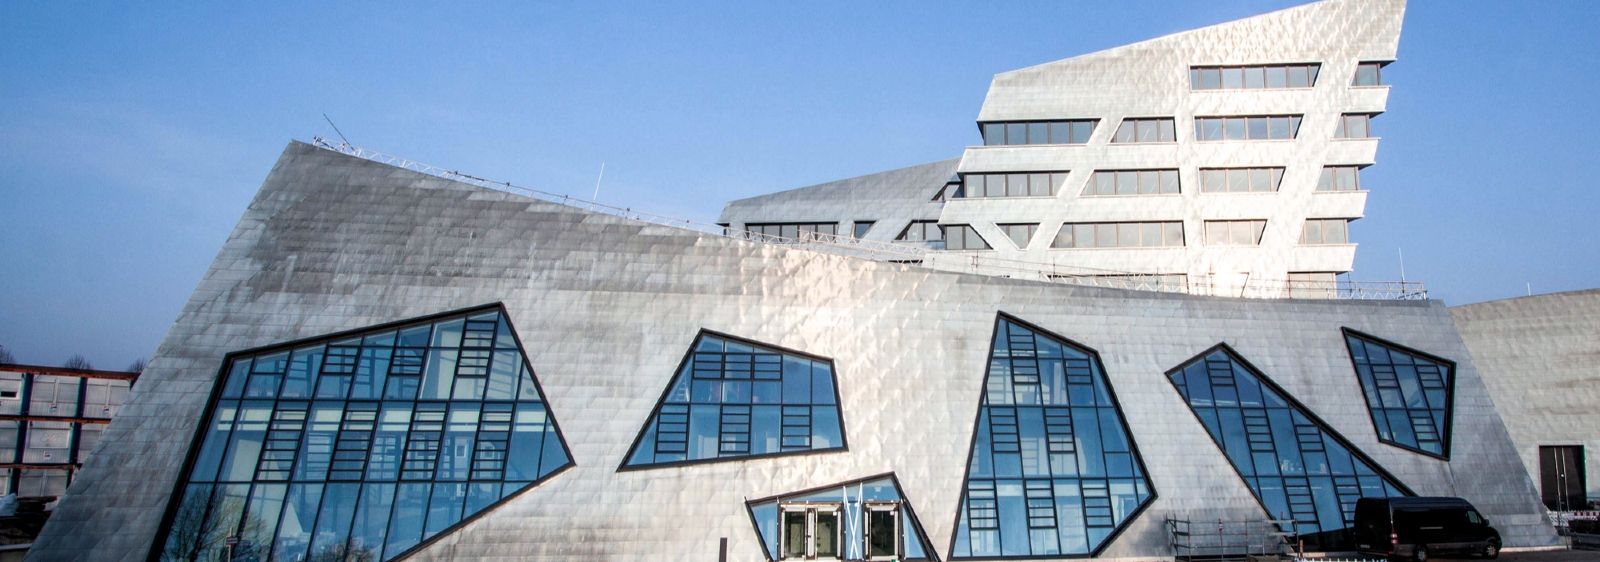 The new central building of Leuphana University was designed by architect Daniel Libeskind.